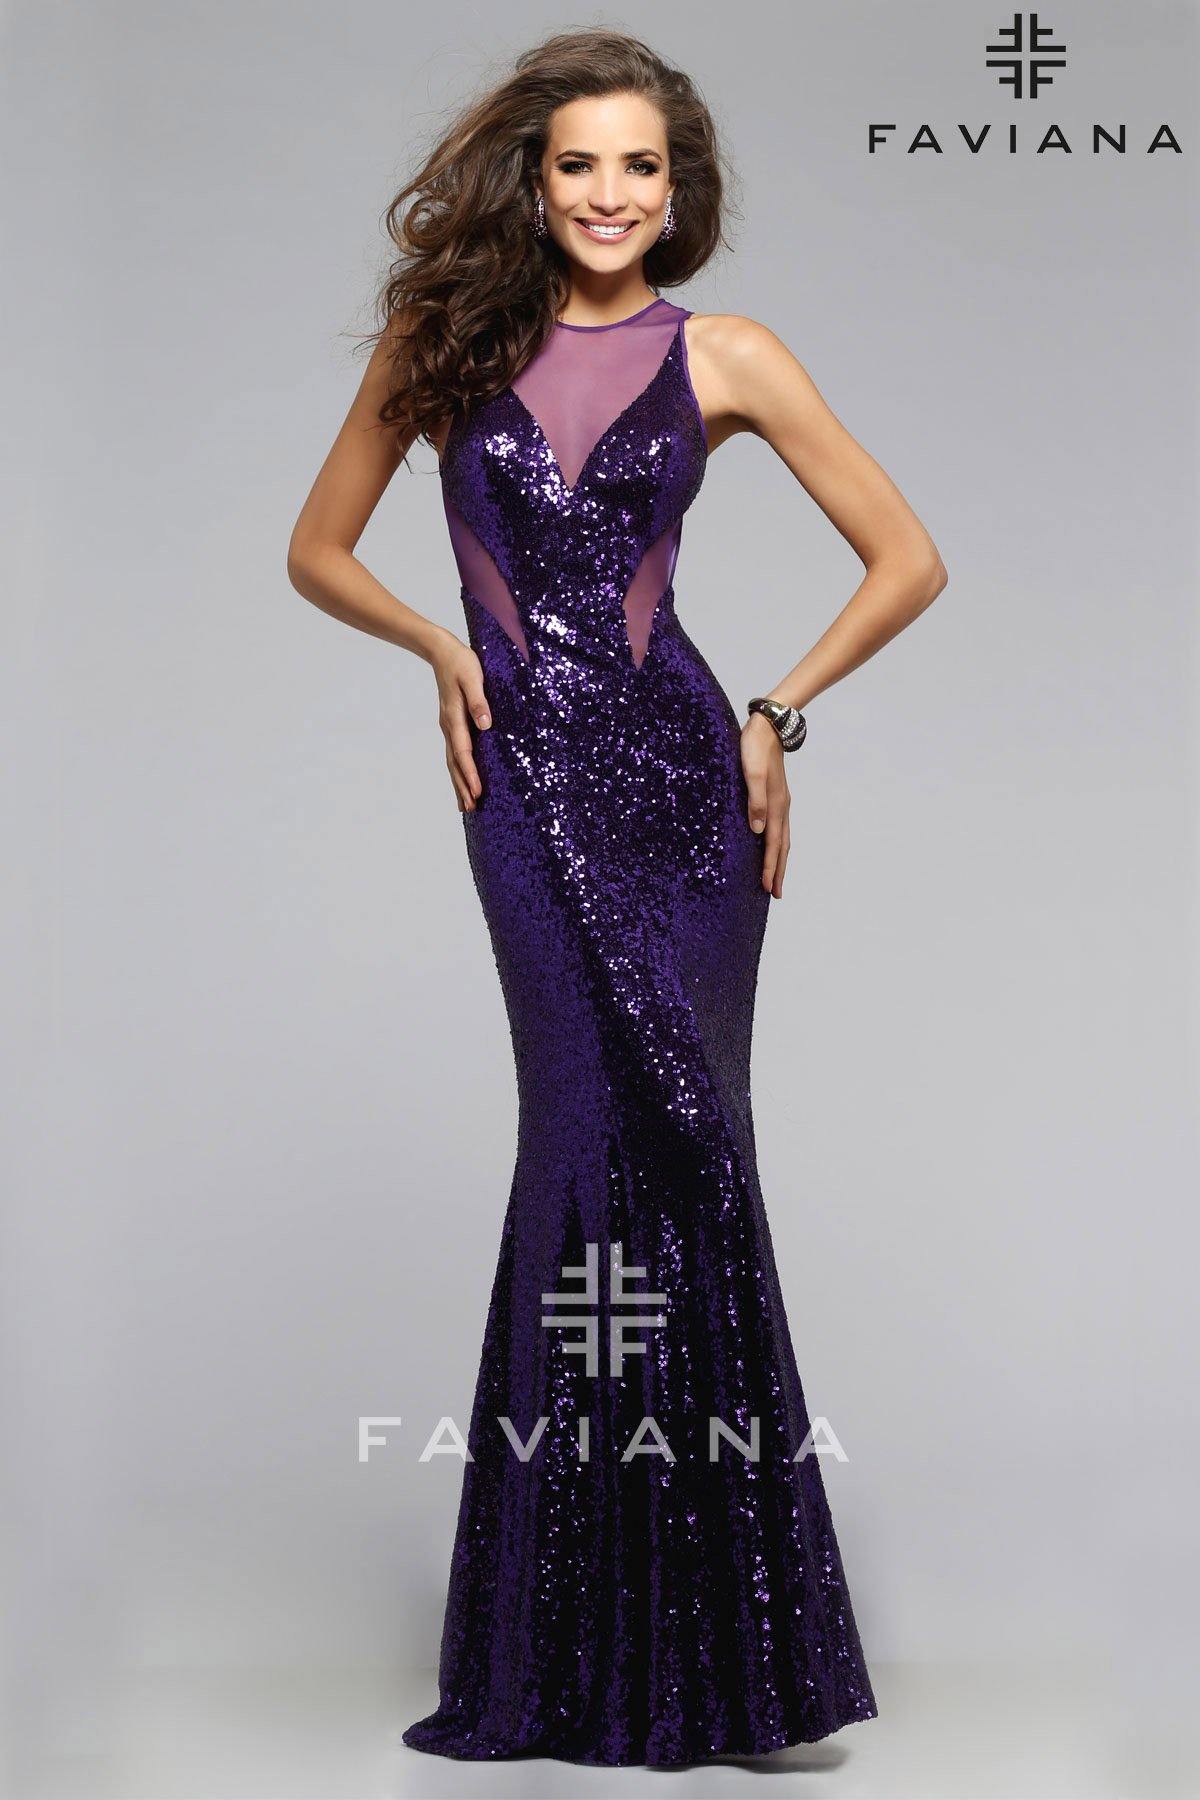 Faviana 7331 Long Mermaid Silhouette Gown - The Dress Outlet Faviana